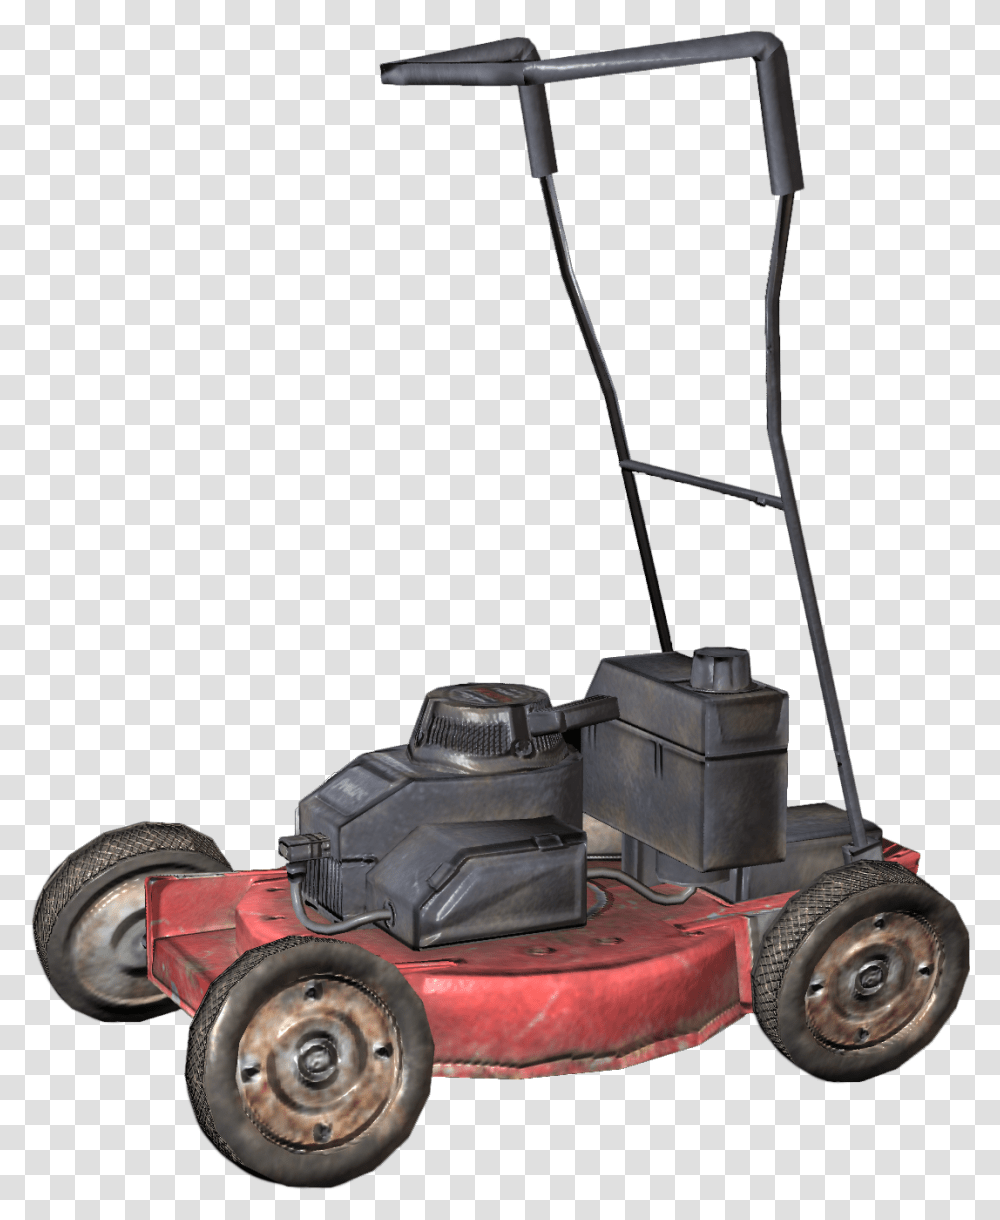 Call Of Duty Black Ops 2 Zombies Nacht Der Untoten, Lawn Mower, Tool Transparent Png